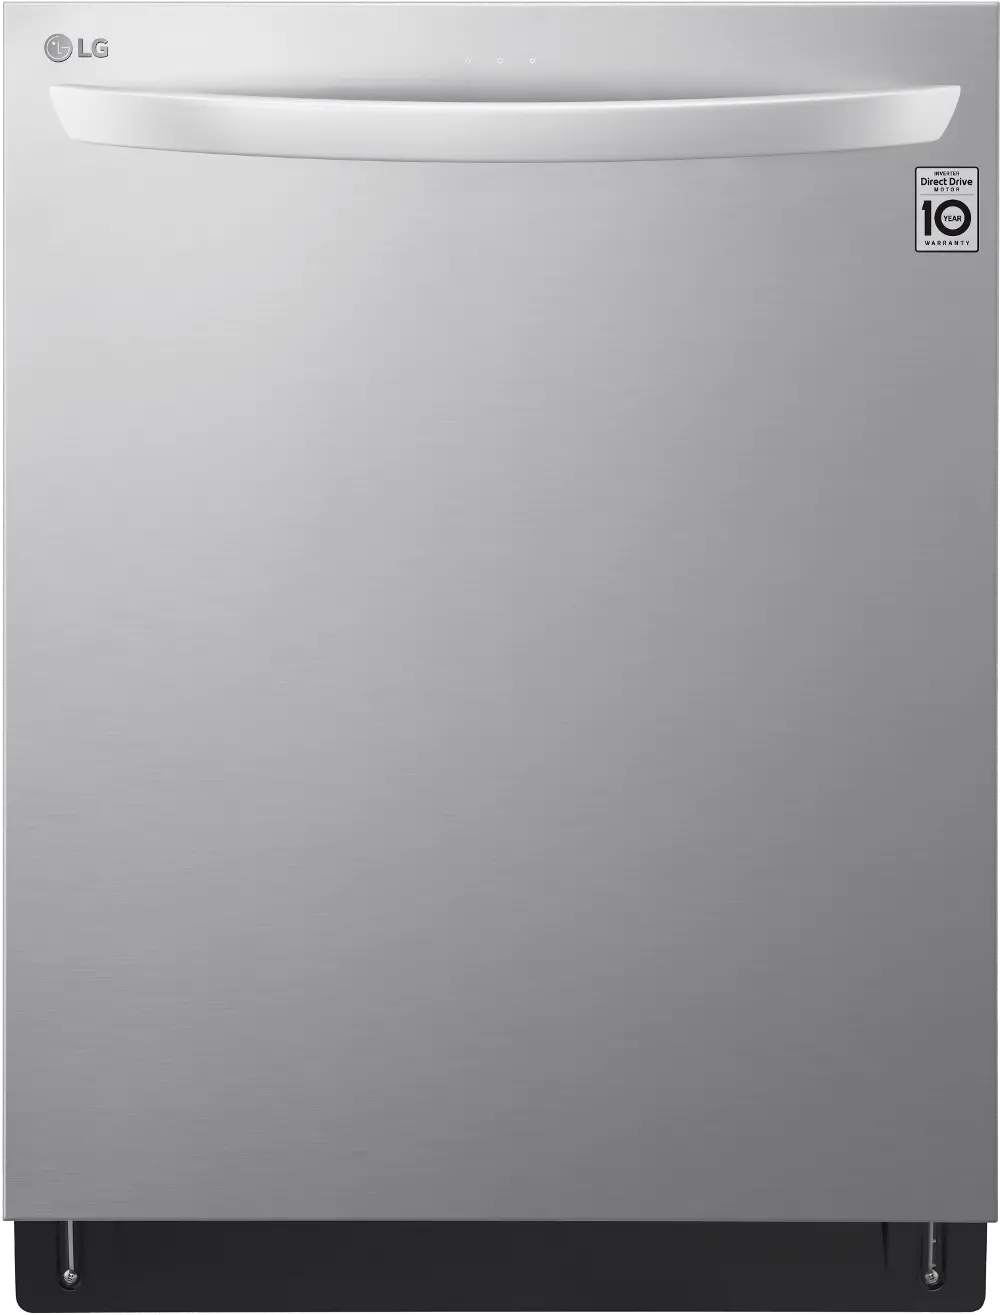 LDT6809SS LG Top Control Smart Dishwasher with Towel Bar Handle - 24 Inch Stainless Steel-1